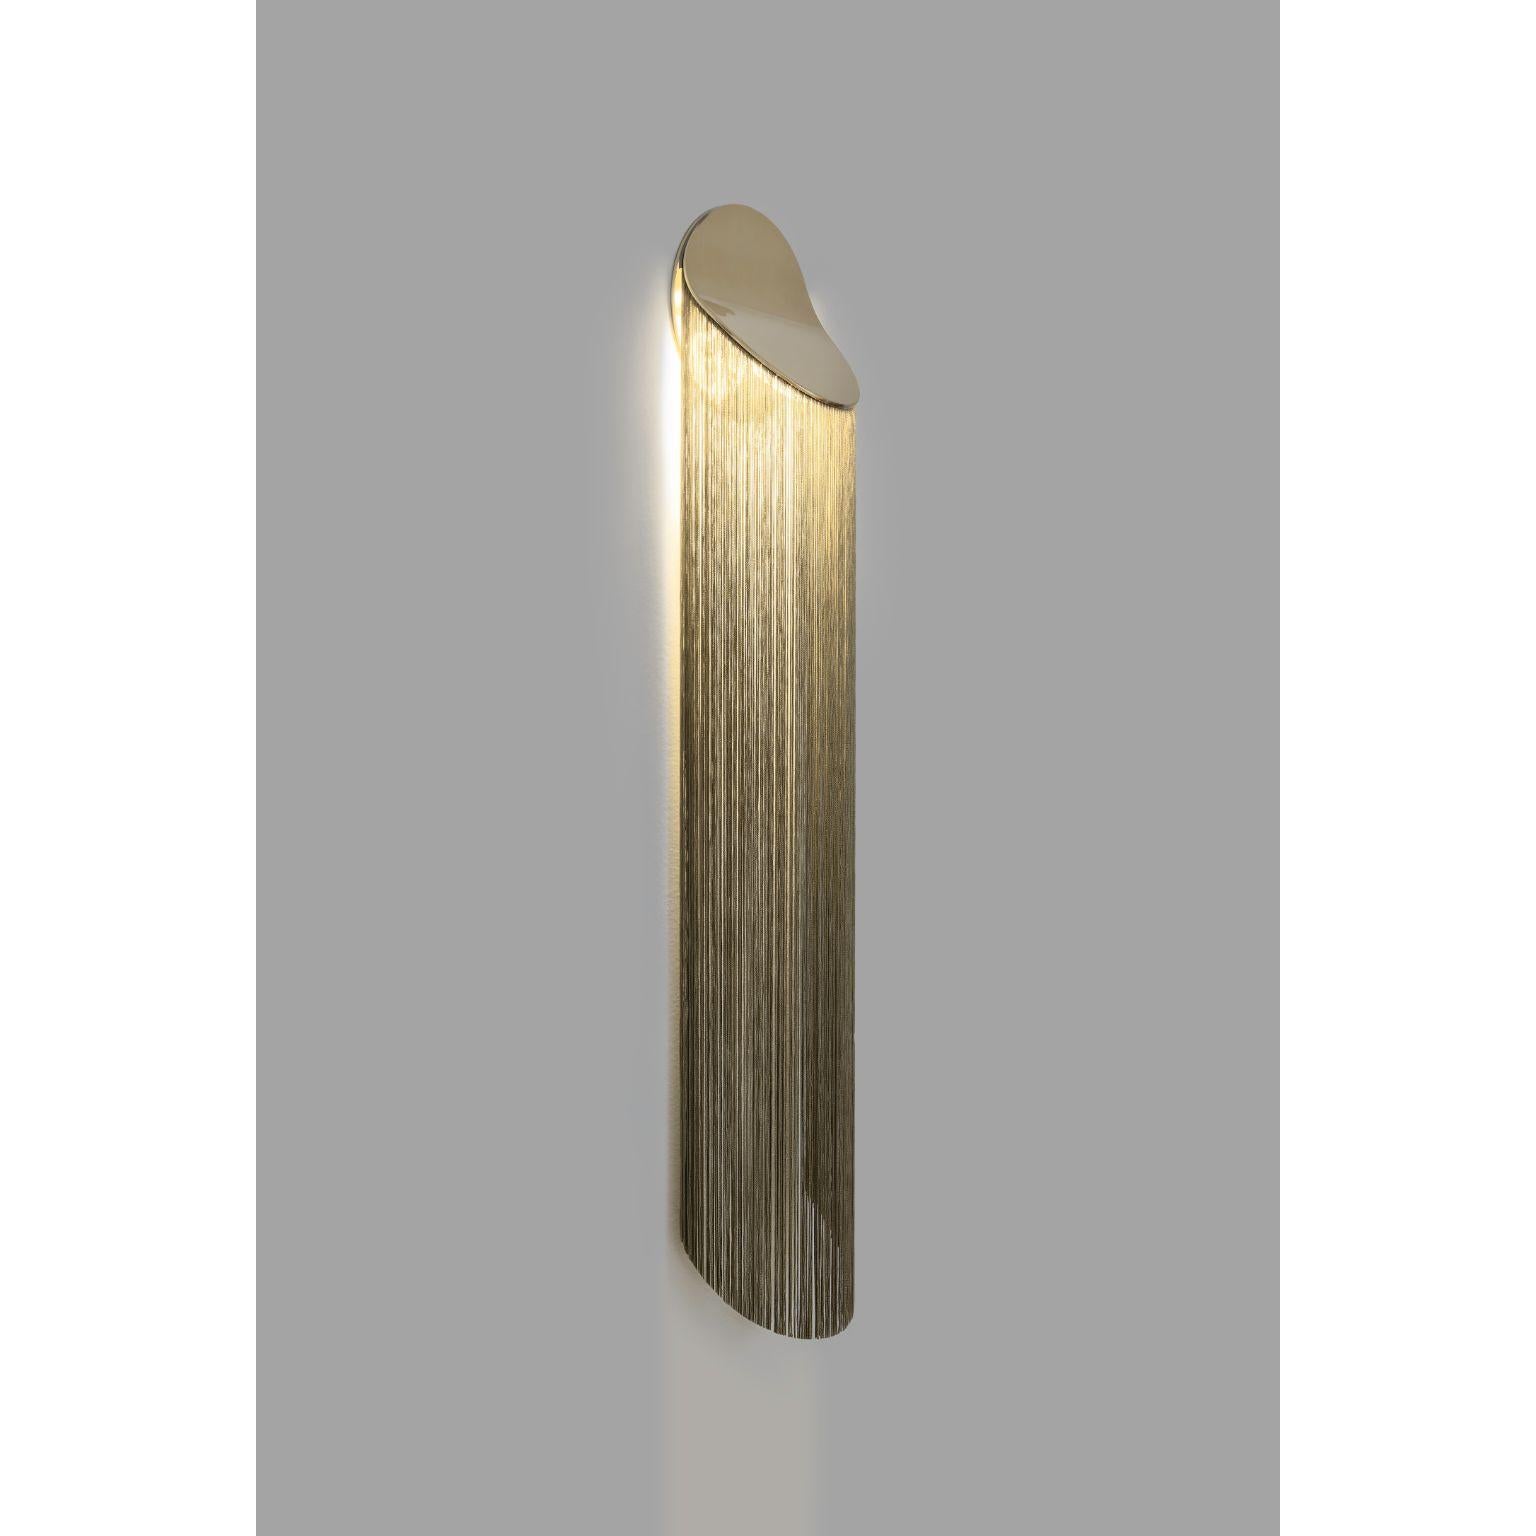 Cé Petite wall lamp long by Studio d'Armes
Design by Alexandre Joncas
Dimensions: 9.9 x 16.5 x H 86.5 cm
Materials: 12k Gold Plated Steel, Rayon fringes offered in different colors

Design by Alexandre Joncas
Cé Petite, with abridged proportions,